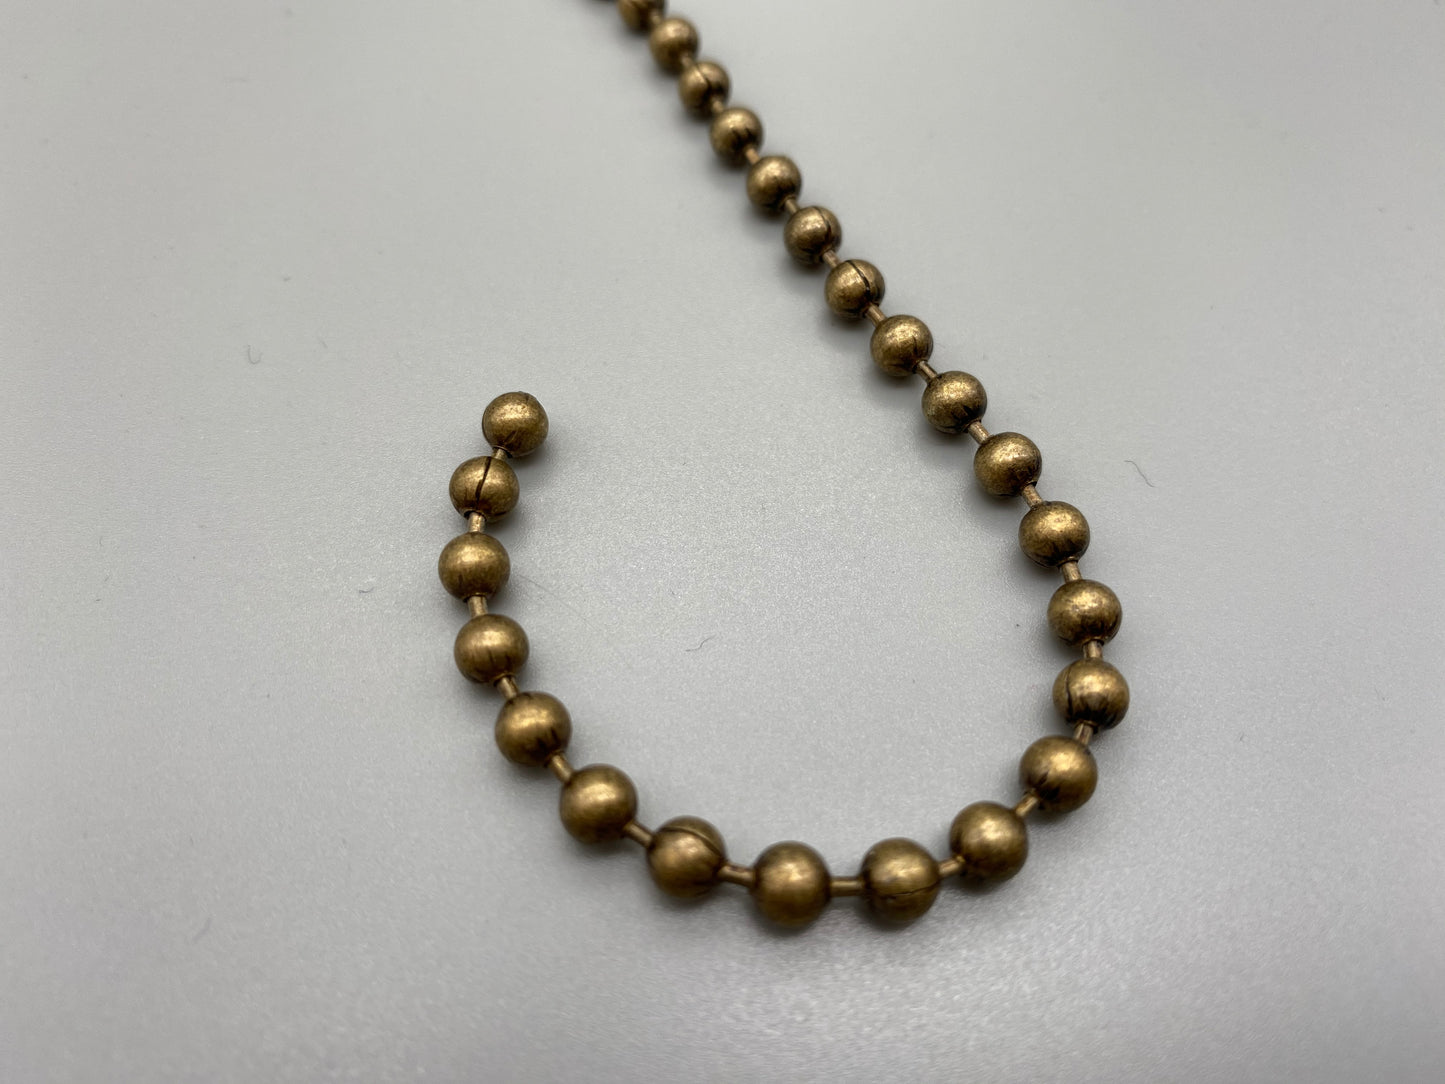 Endless Antique Brass Metal Chain - No.10 Bead Size: 4.5mm Loop